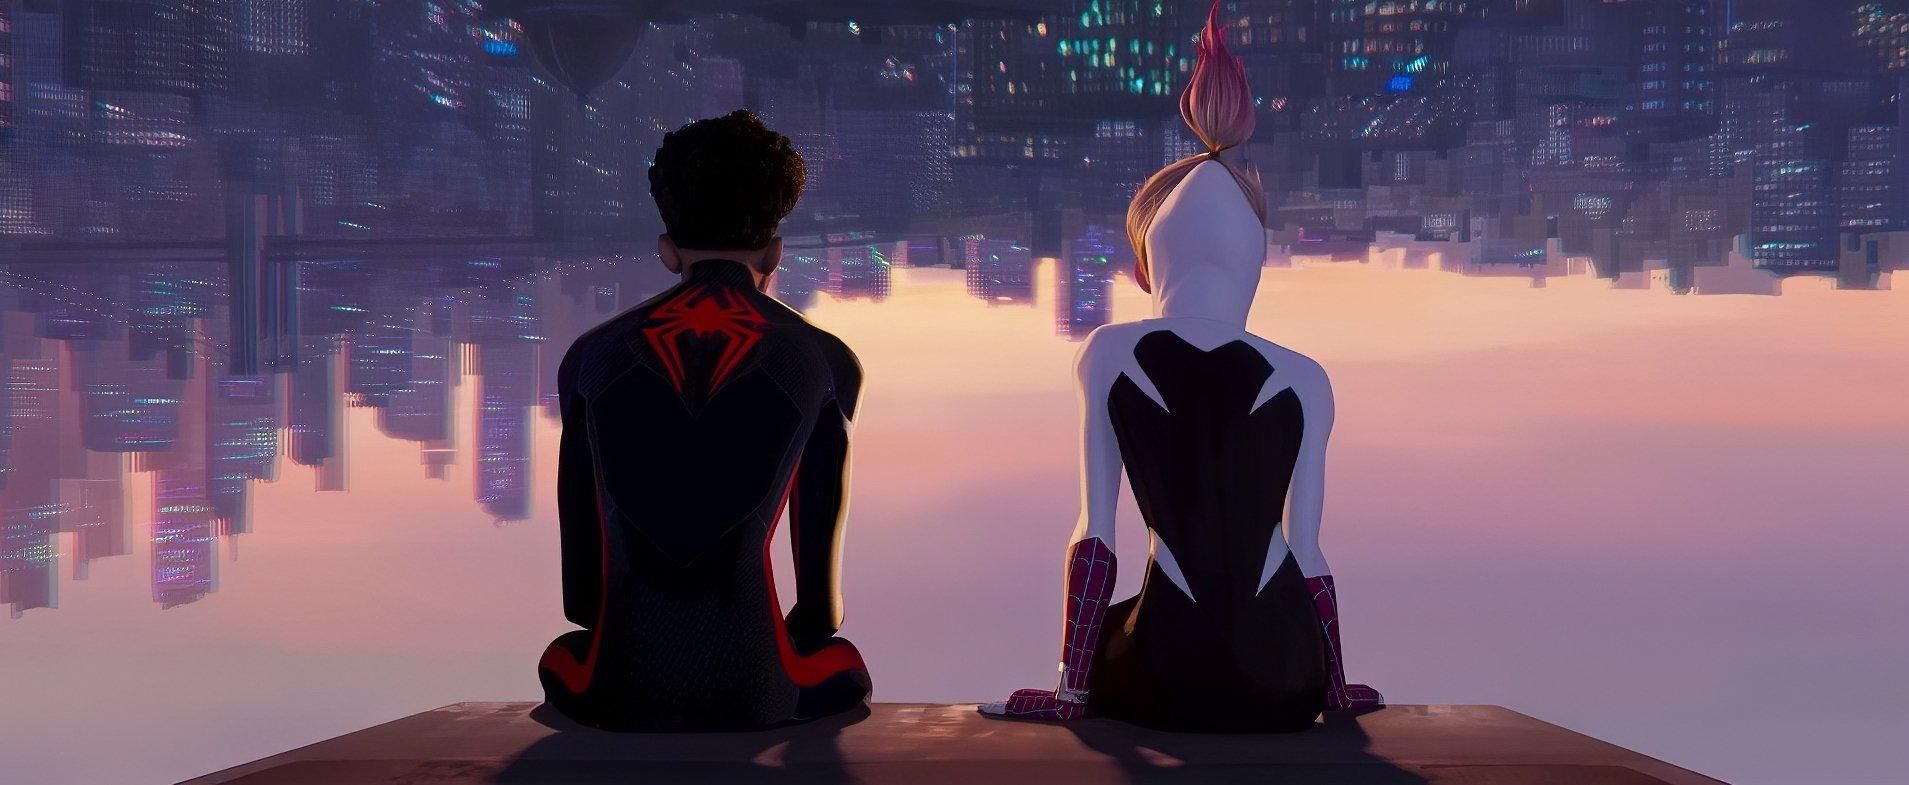 Spider-Man: Across The Spider-Verse Movie Review: In A Room Full